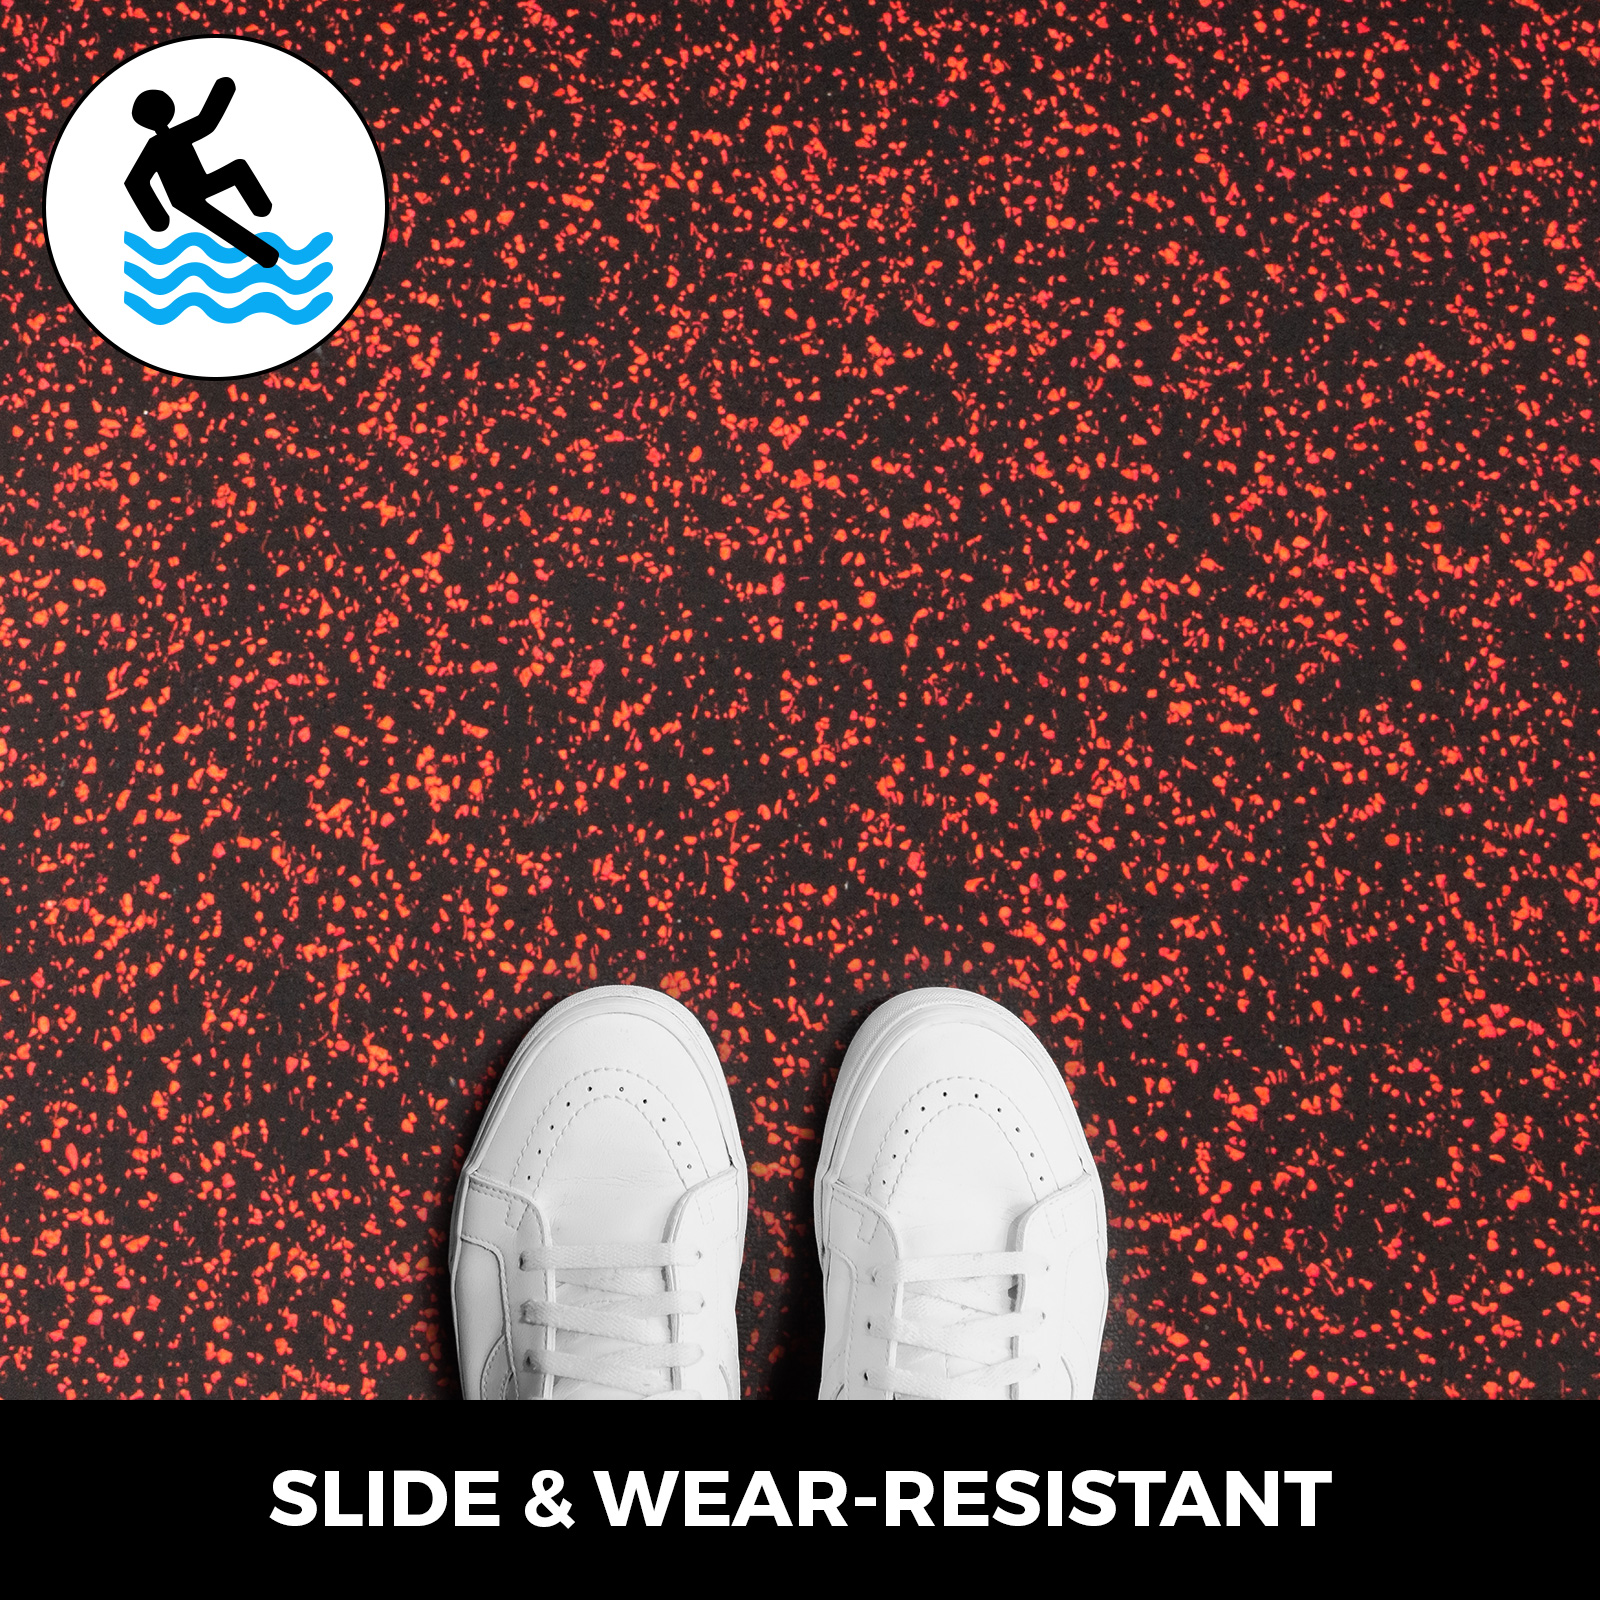 Red Speckle Rubber Flooring Roll